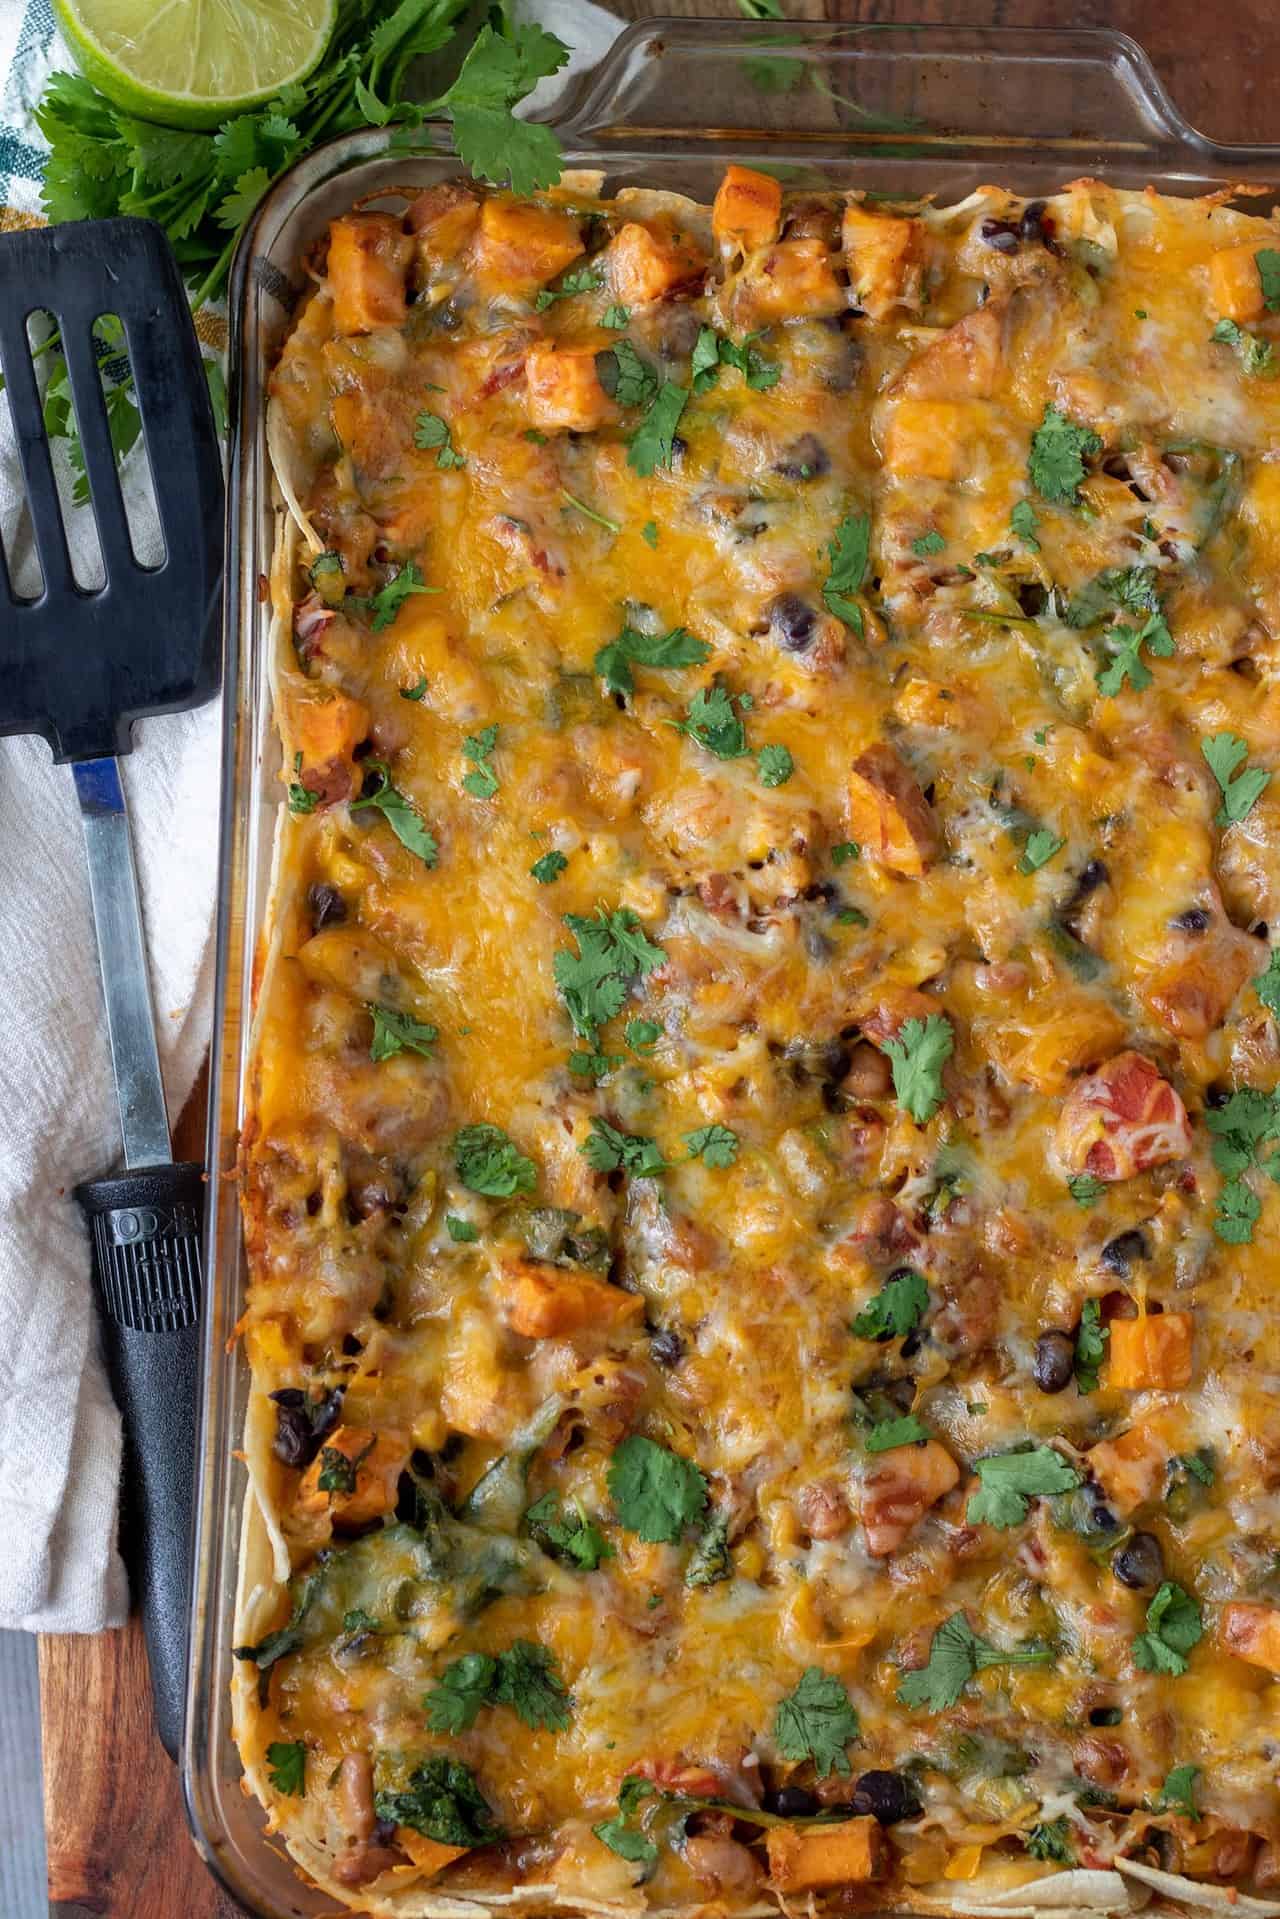 A glass baking dish with a vegetable enchilada casserole. It's topped with fresh cilantro and cheese. There's a spatula next to the baking dish for serving.